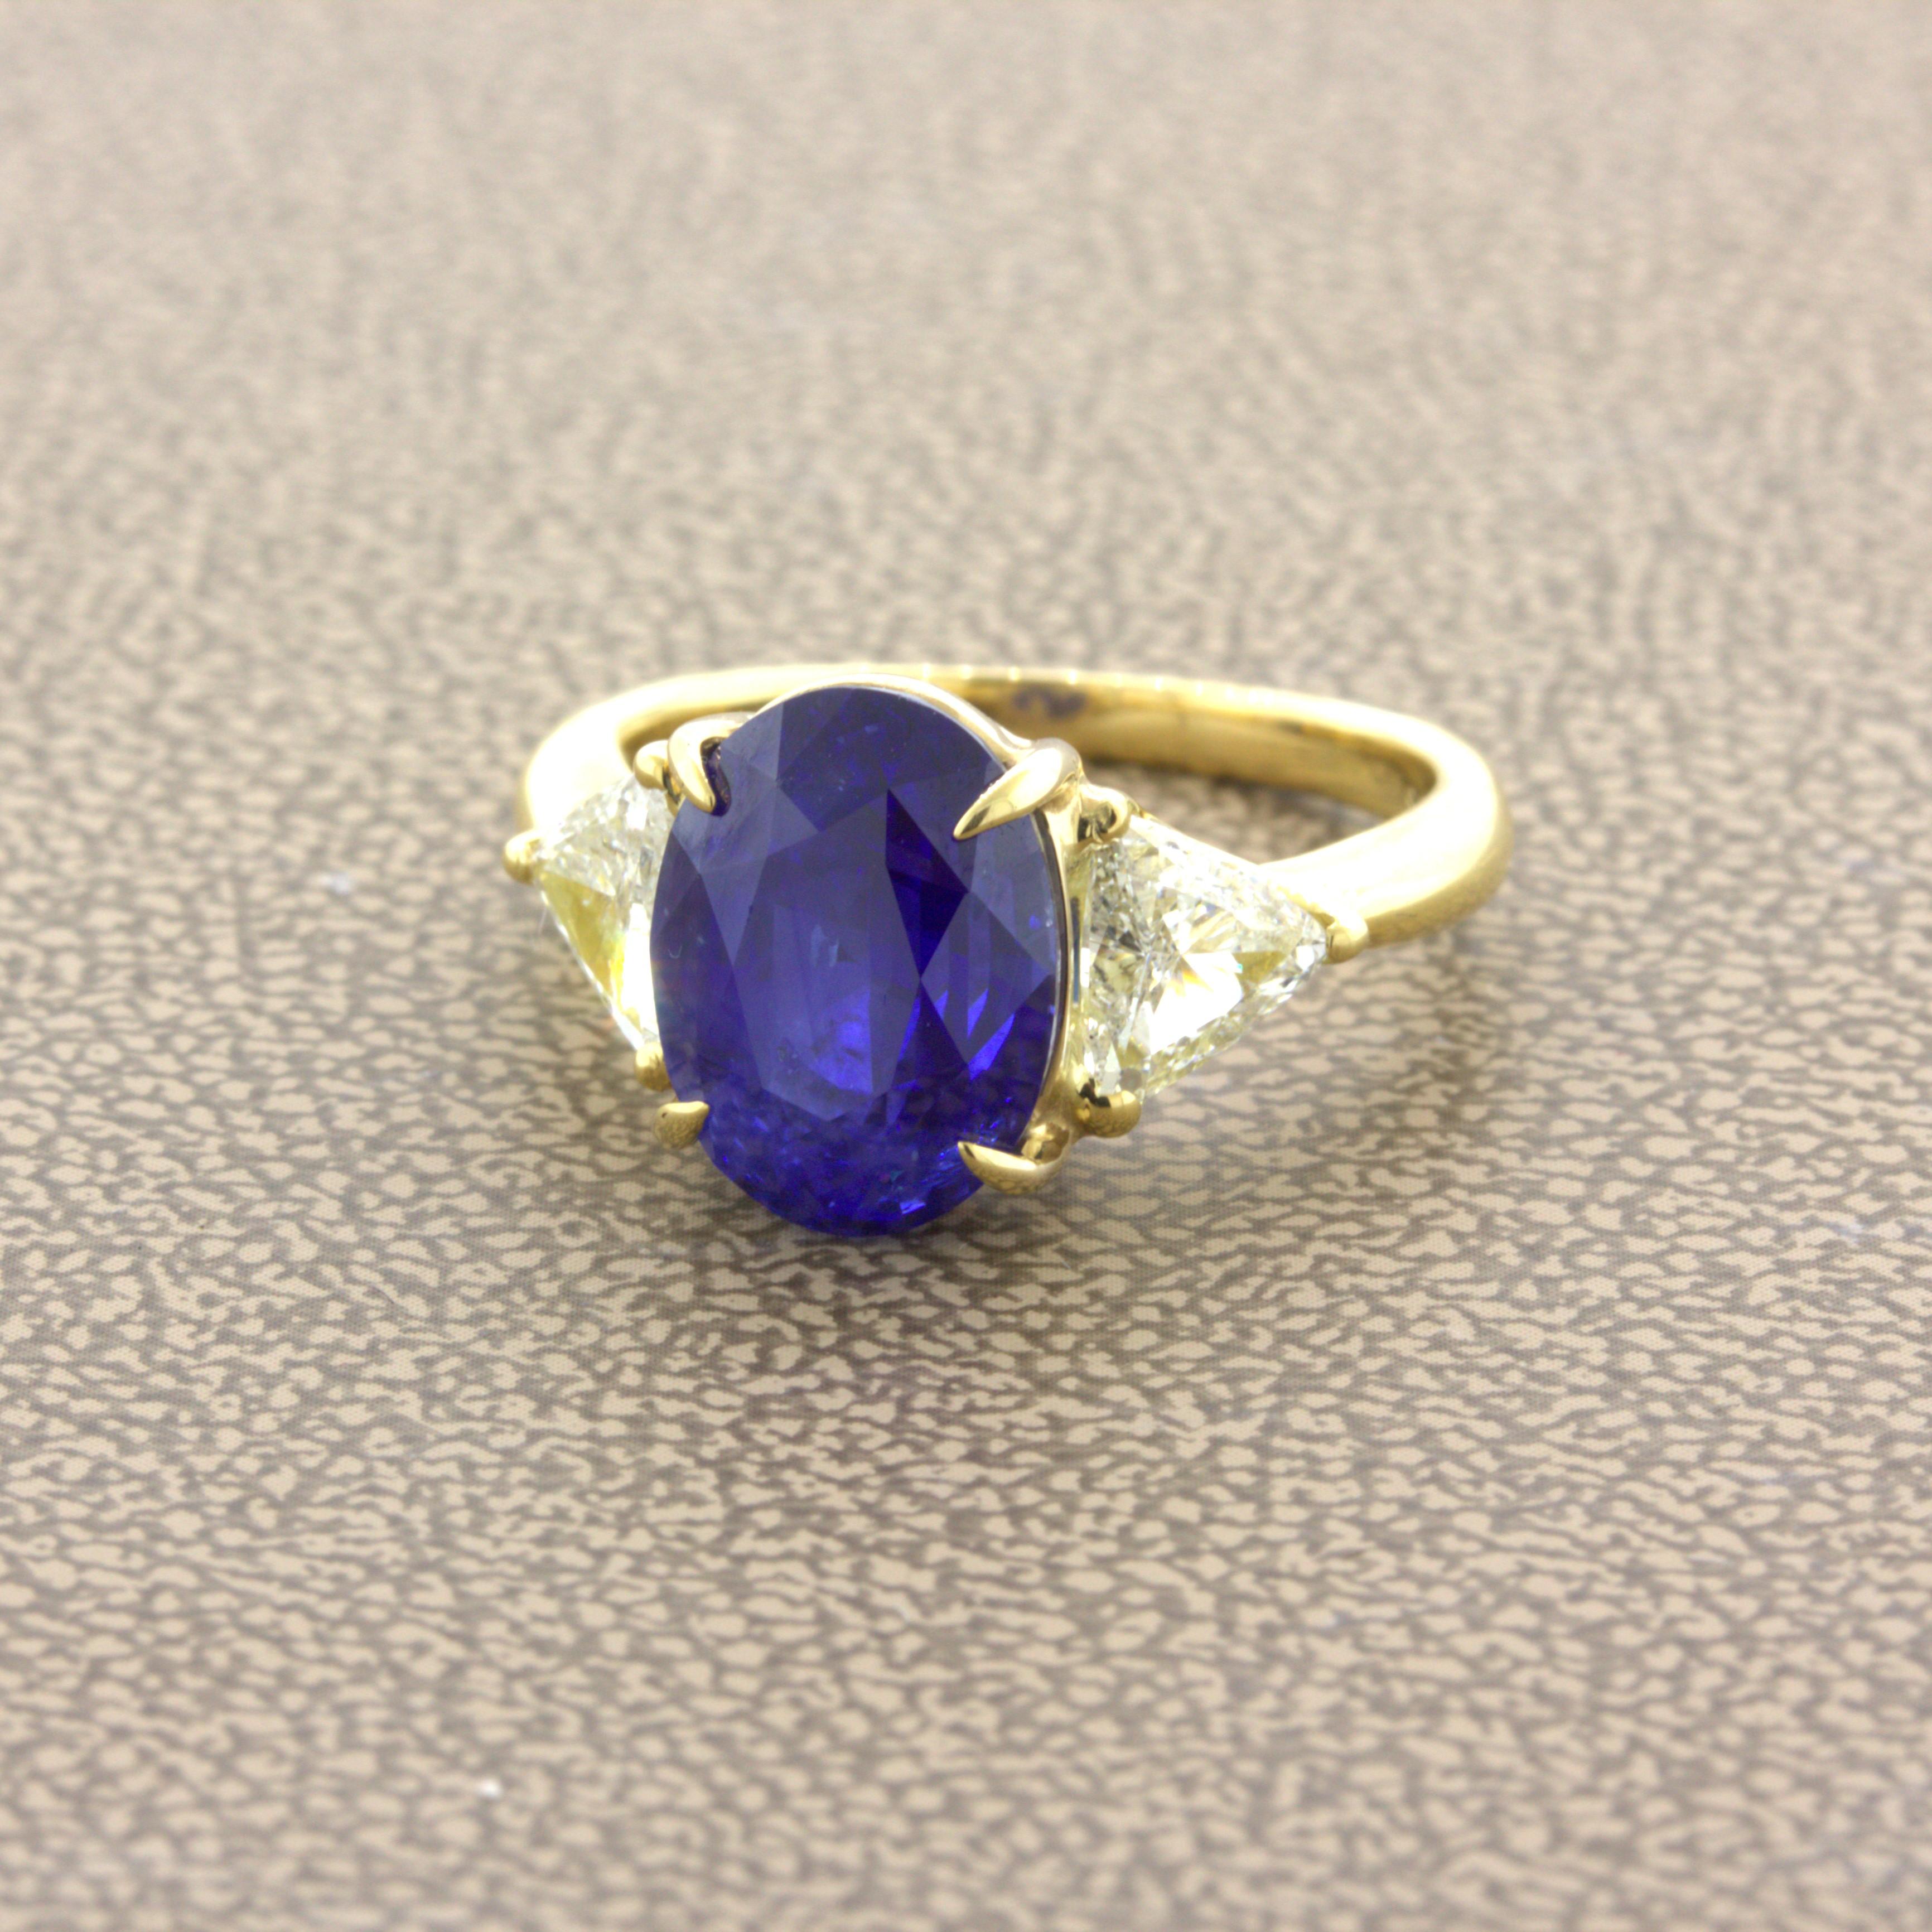 Oval Cut 5.87 Carat Blue Sapphire Diamond 18k Yellow Gold 3-Stone Ring, GIA Certified For Sale